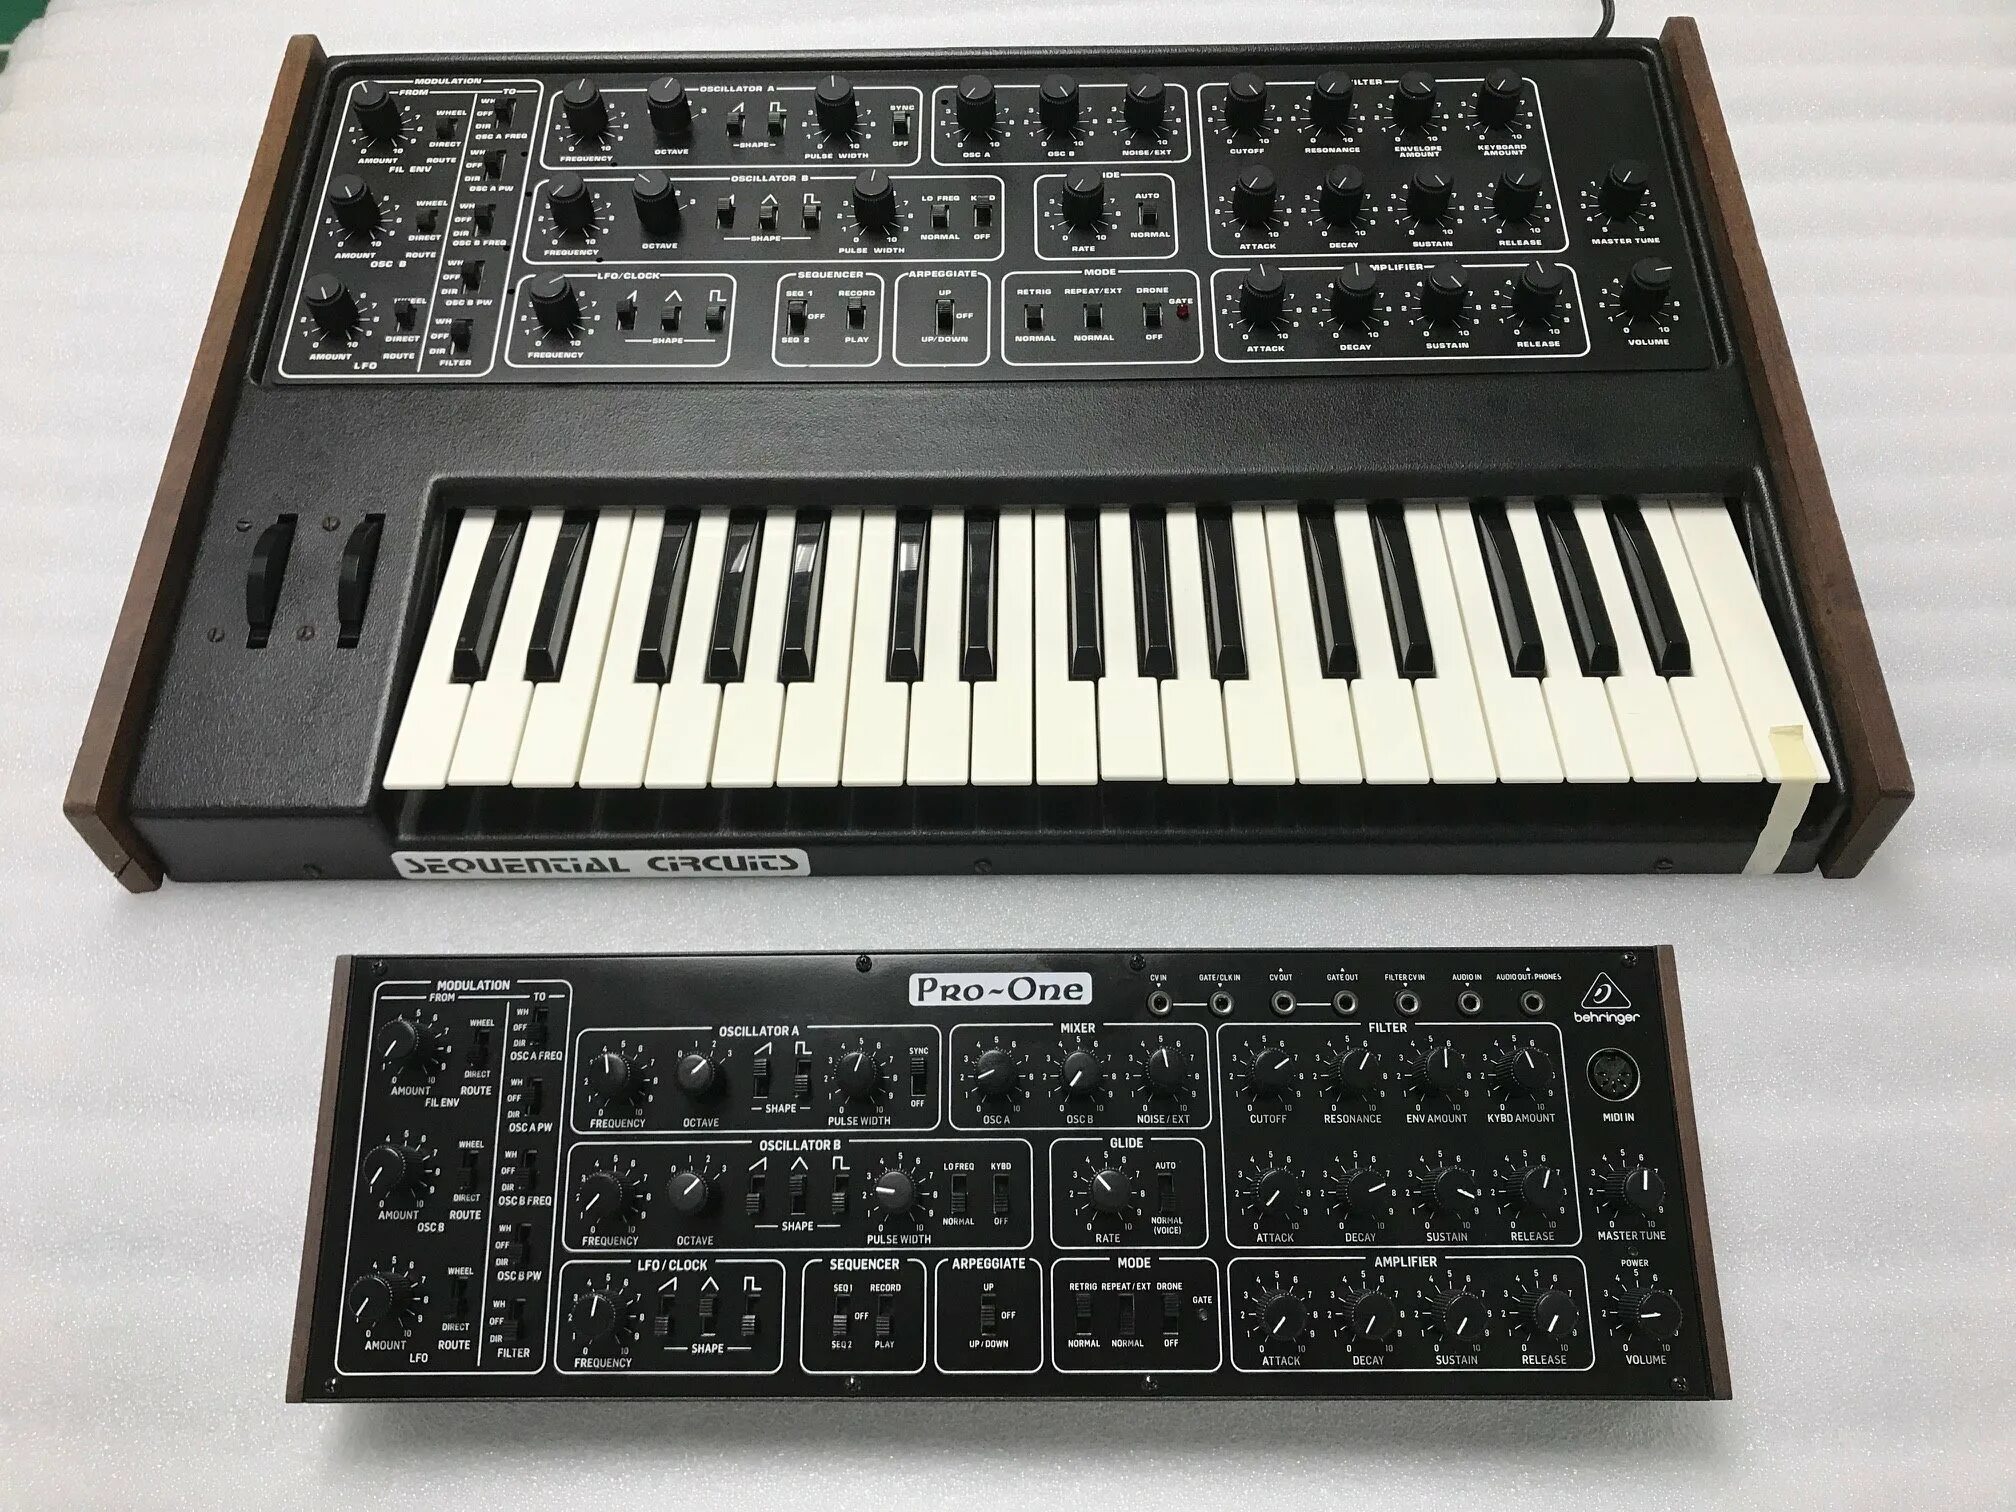 Pro 1.16 5. Behringer Pro-1. Sequential circuits Pro one. Pro one Synth. Синтезатор the one.